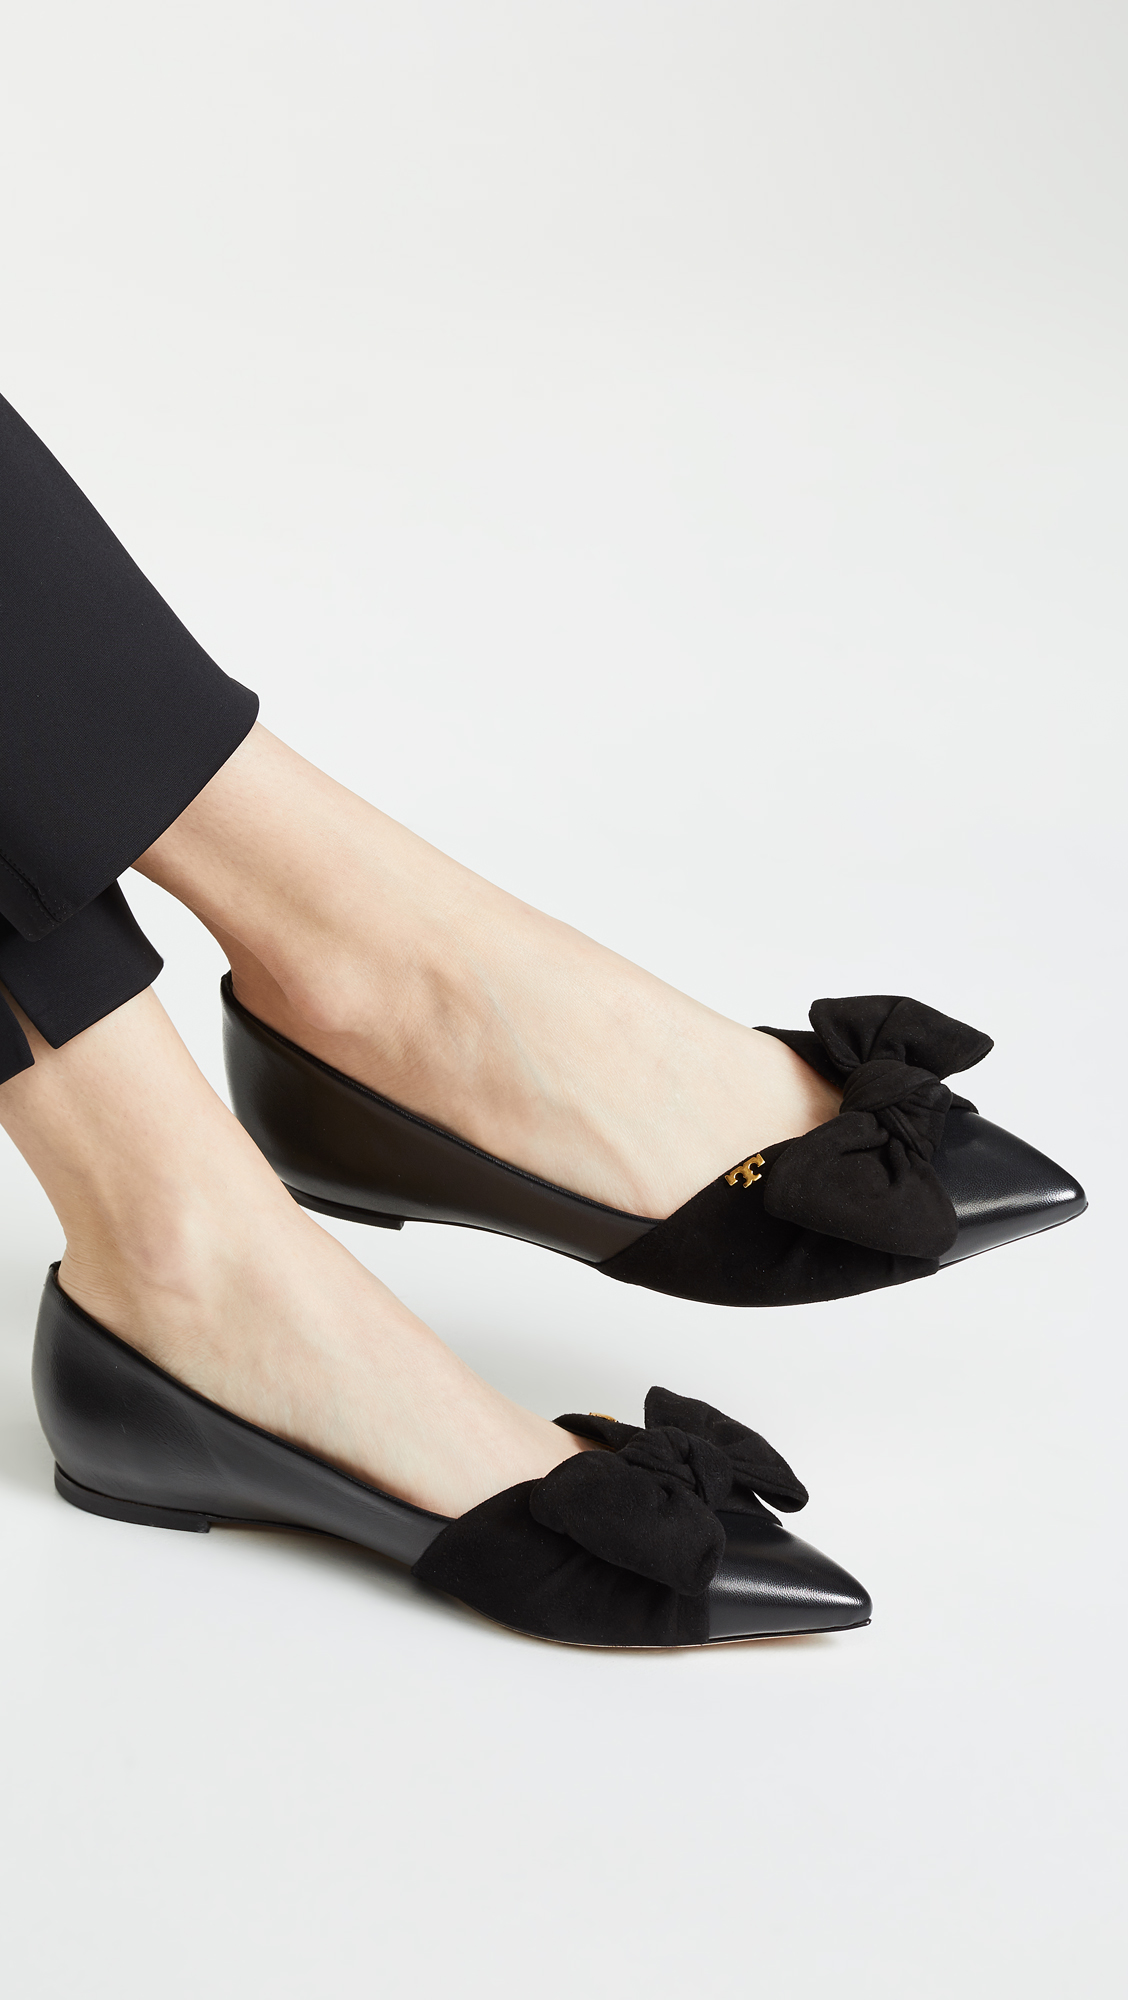 Tory Burch Pointed Toe Flats